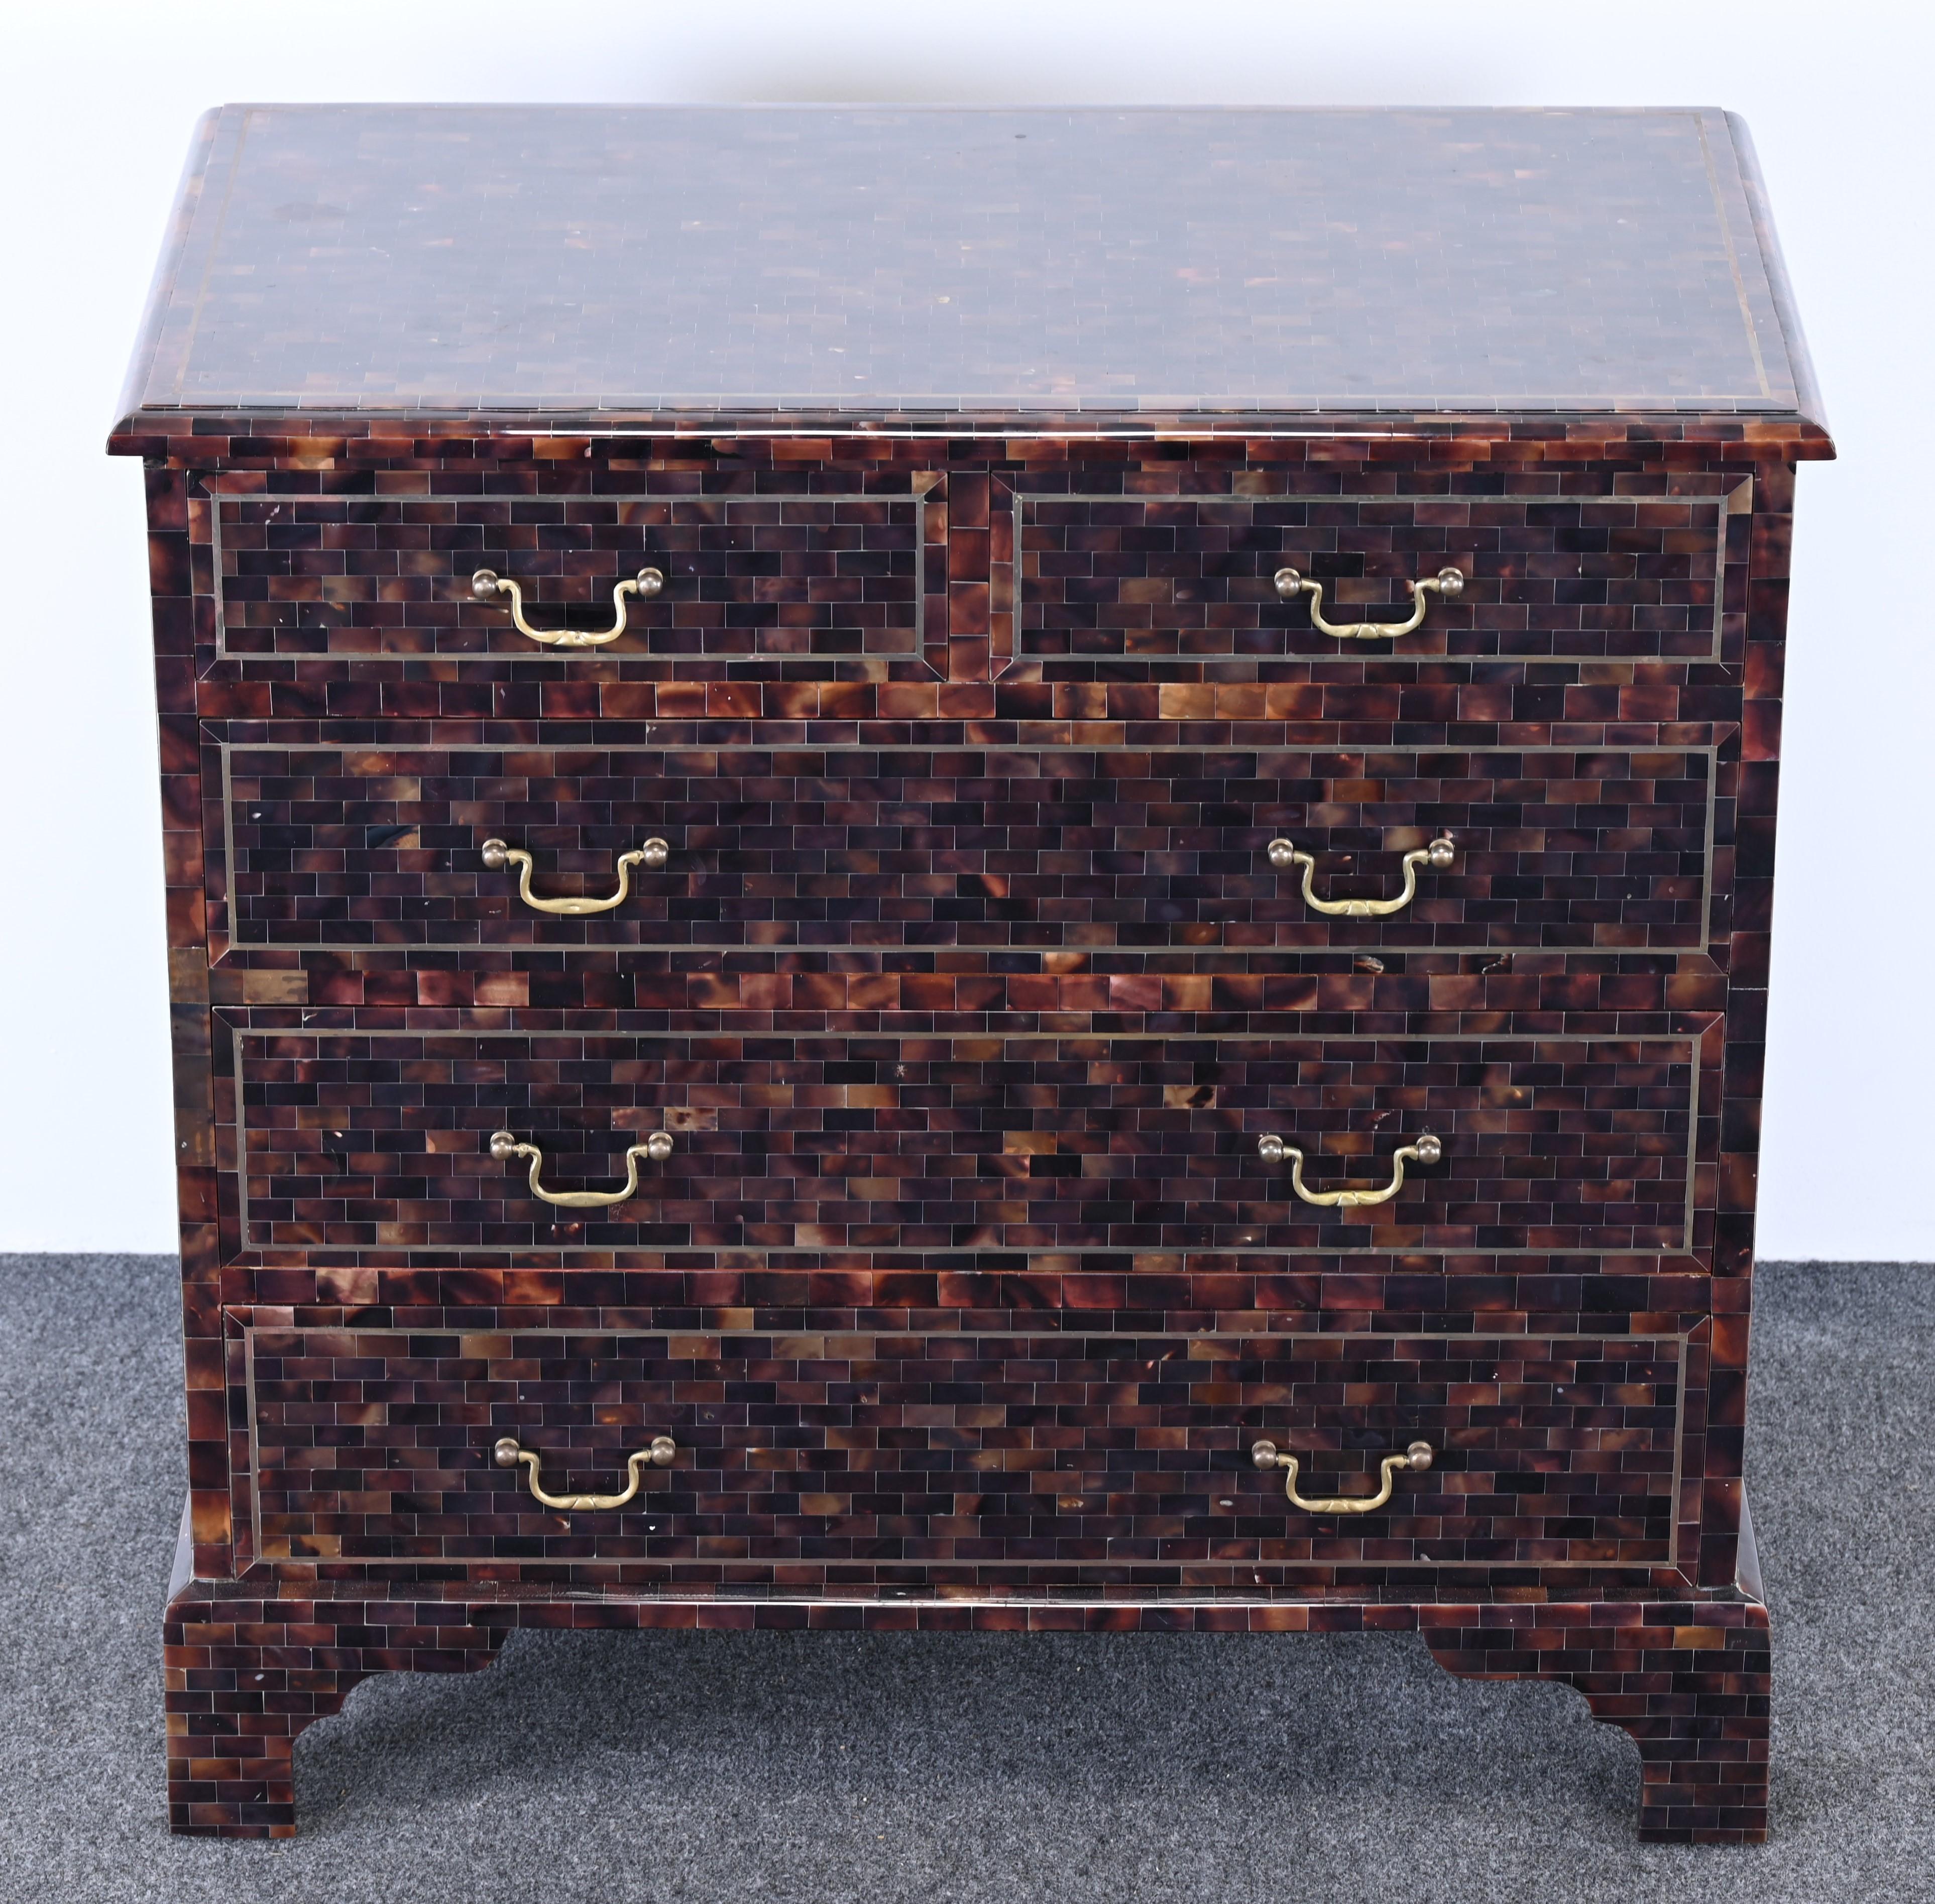 A handsome tessellated horn chest of drawers by Maitland Smith. This beautiful chest has bracket feet and George III brass hardware. There are two small drawers over three larger drawers for ample storage. The chest has brass inlay around all of the